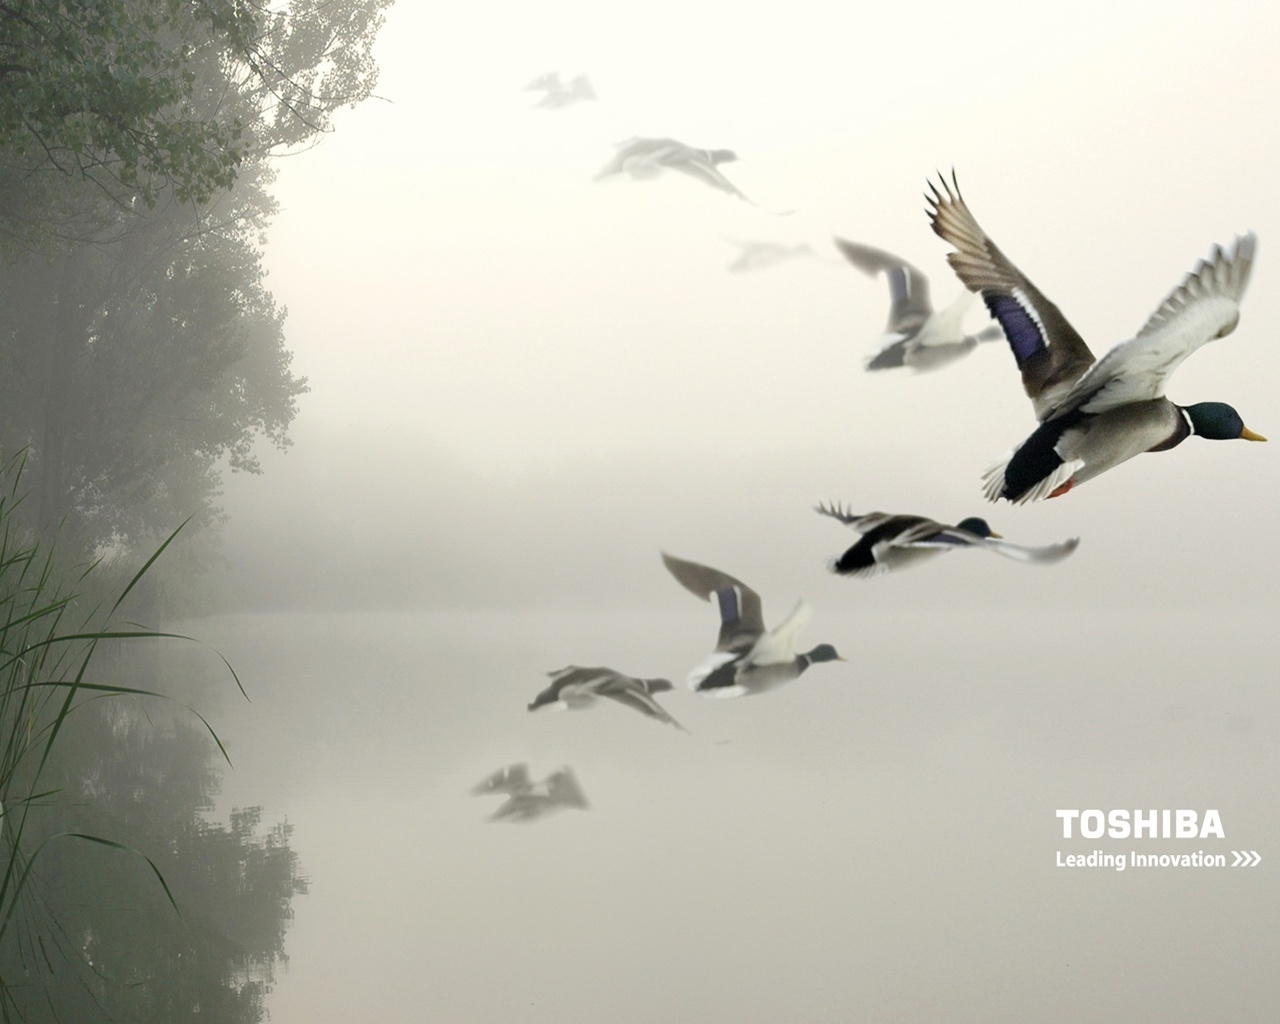 Toshiba birds in the air for 1280 x 1024 resolution